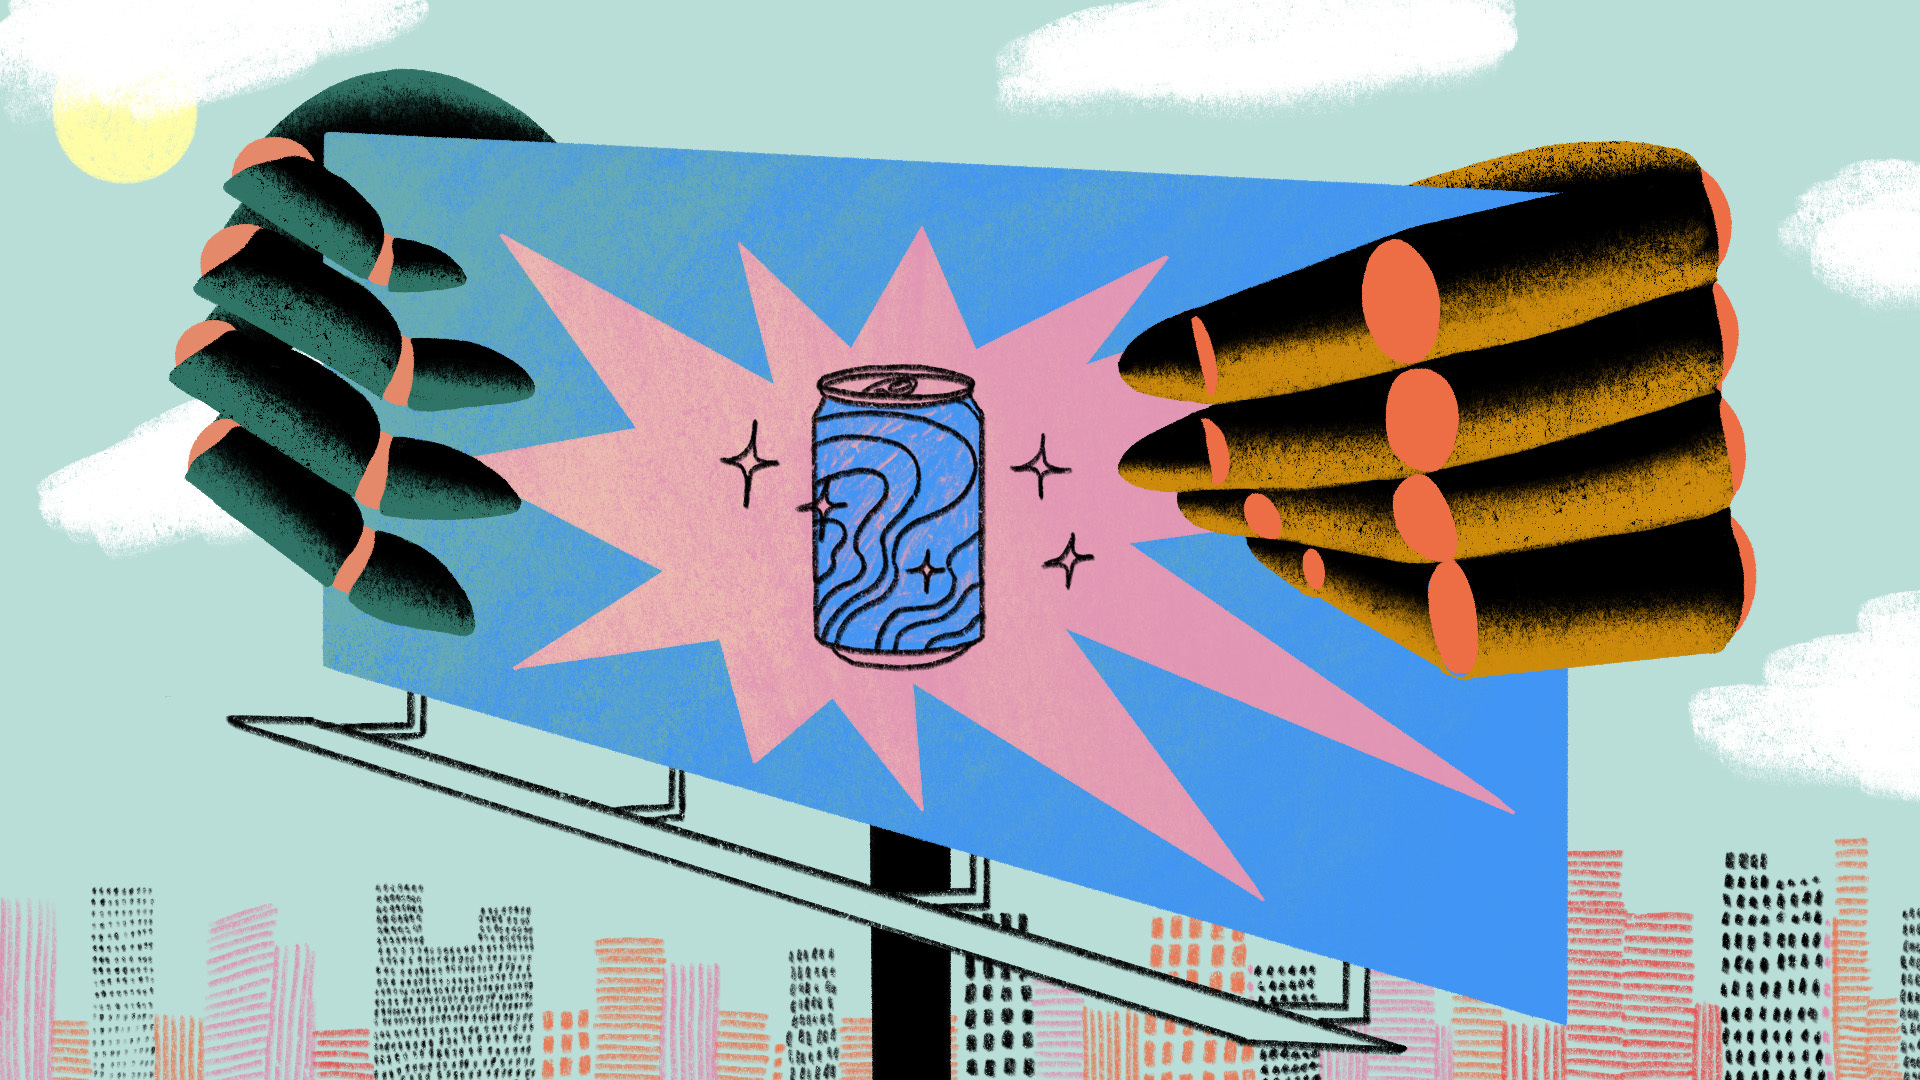 Illustration of a billboard featuring a soda can but the billboard is being gripped by large robot hands.